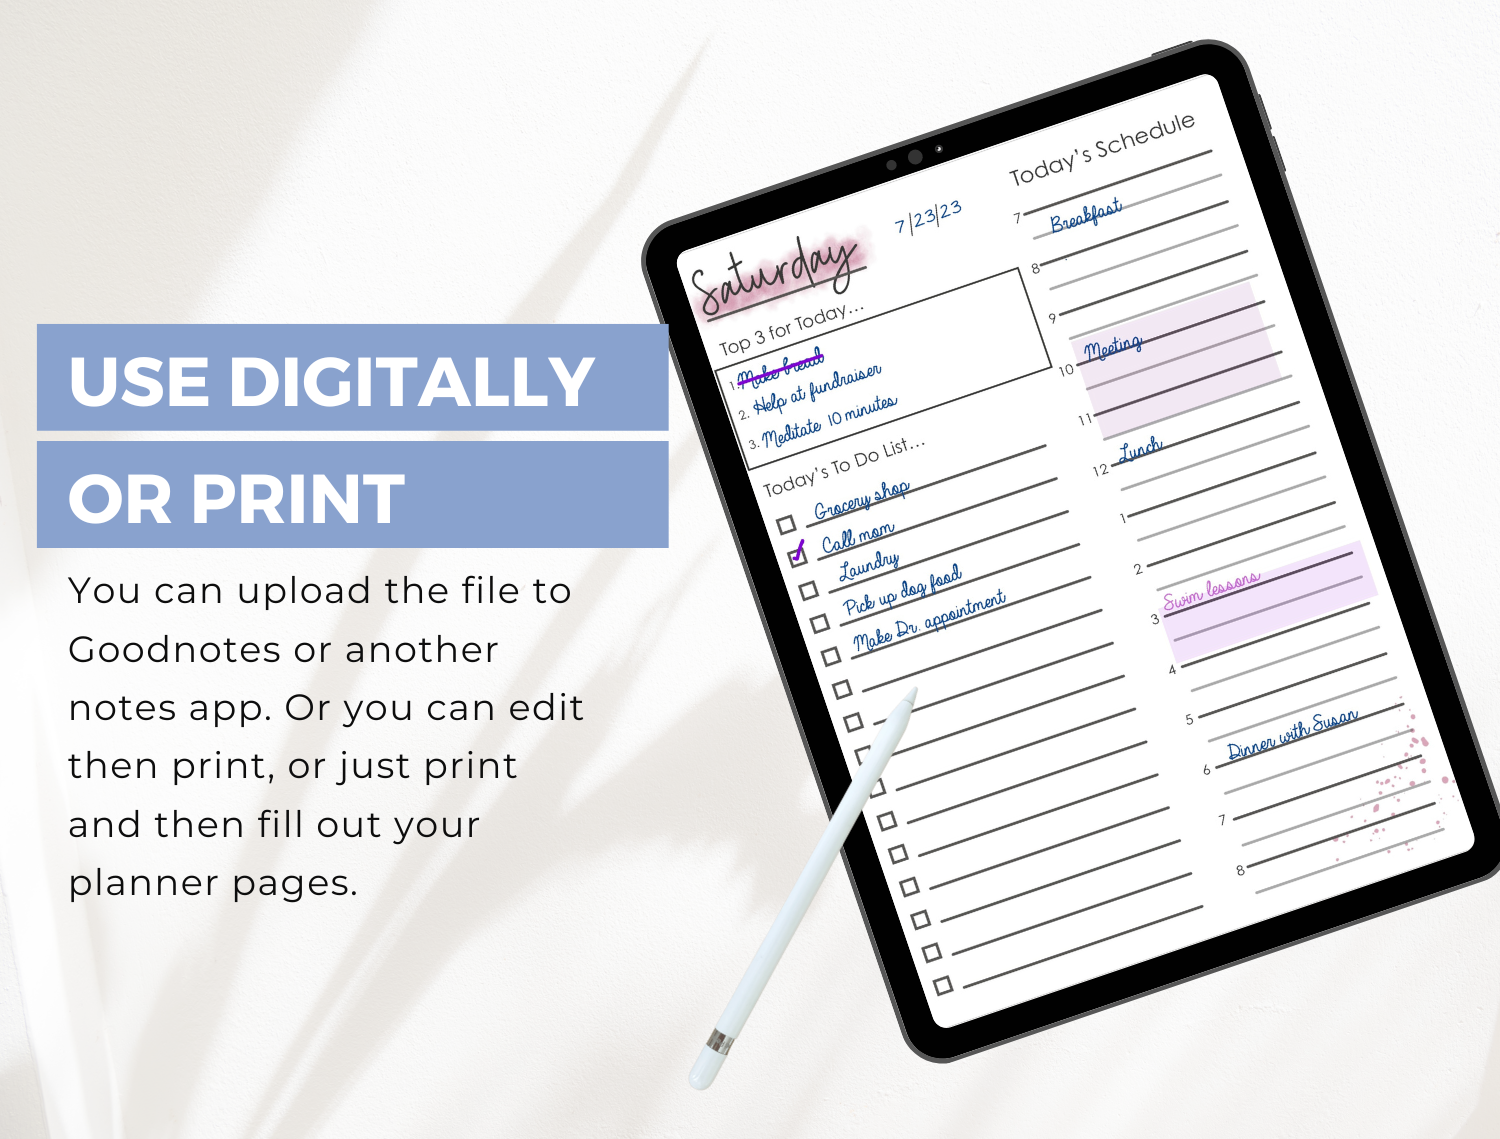 You can use the daily minimalist planner digitally, printed or edit then print. 